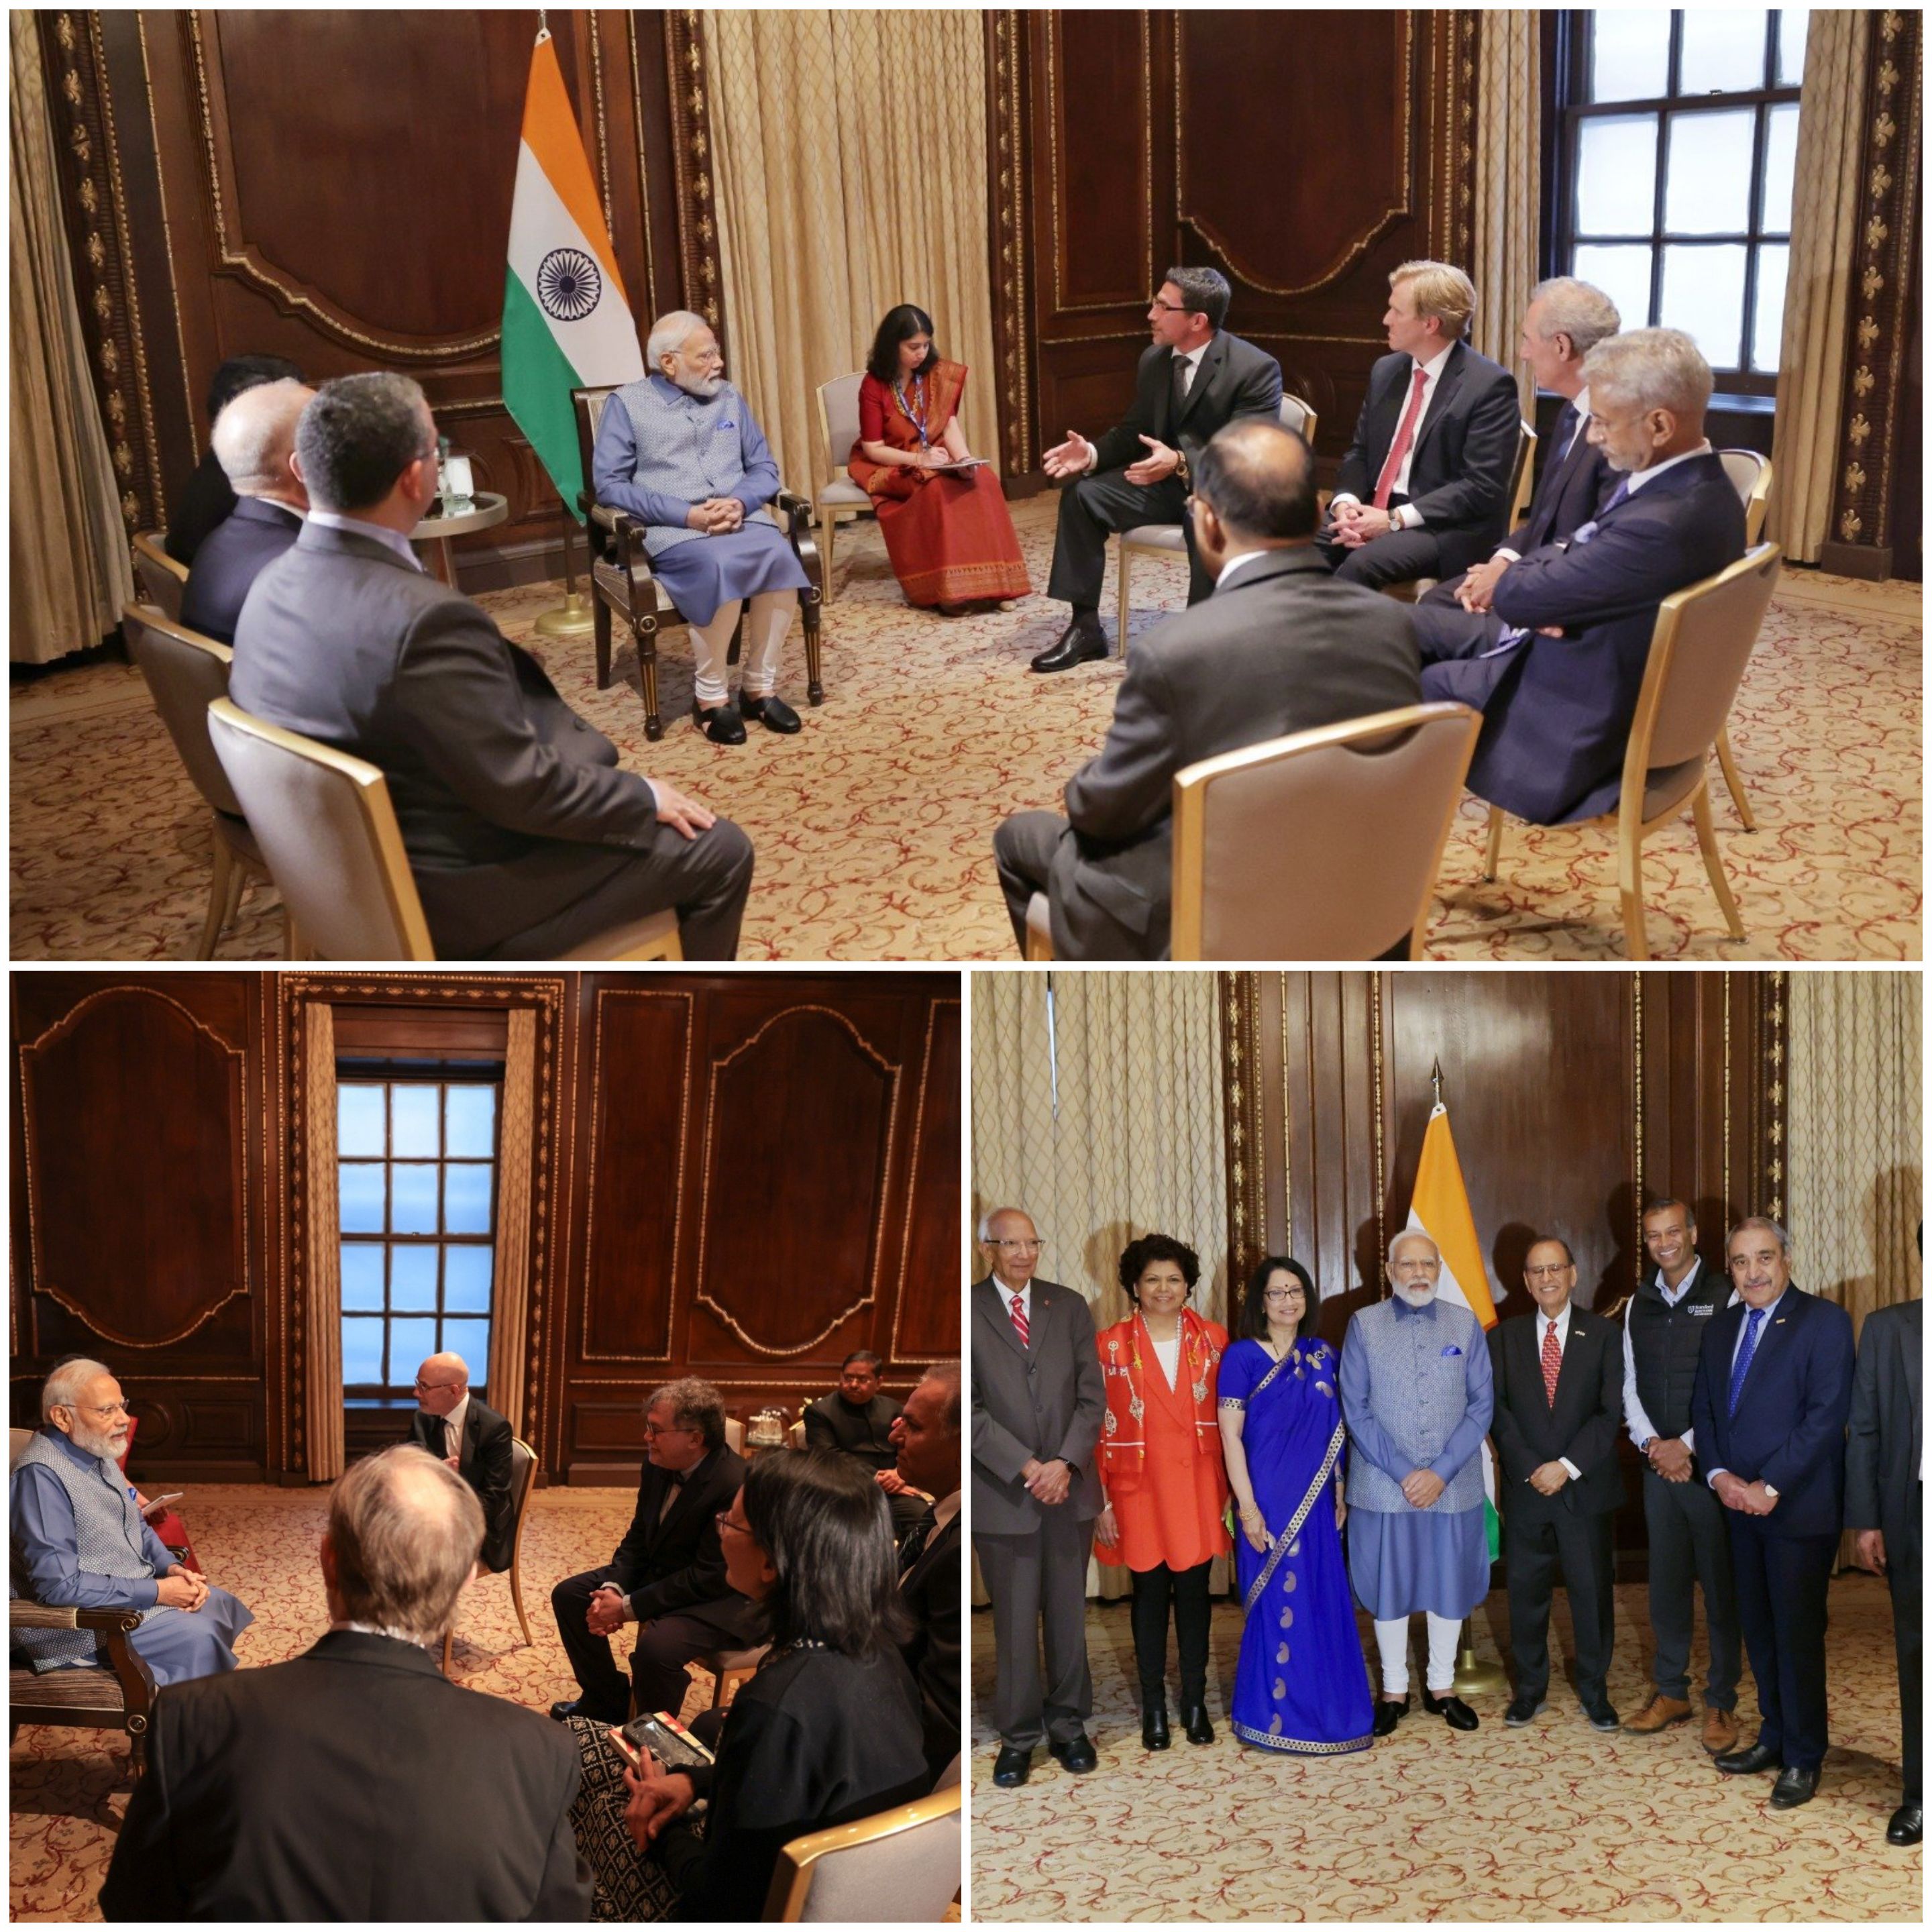 On the 1st day of the state visit to US, PM modi meets visionaries, think tanks and policy makers